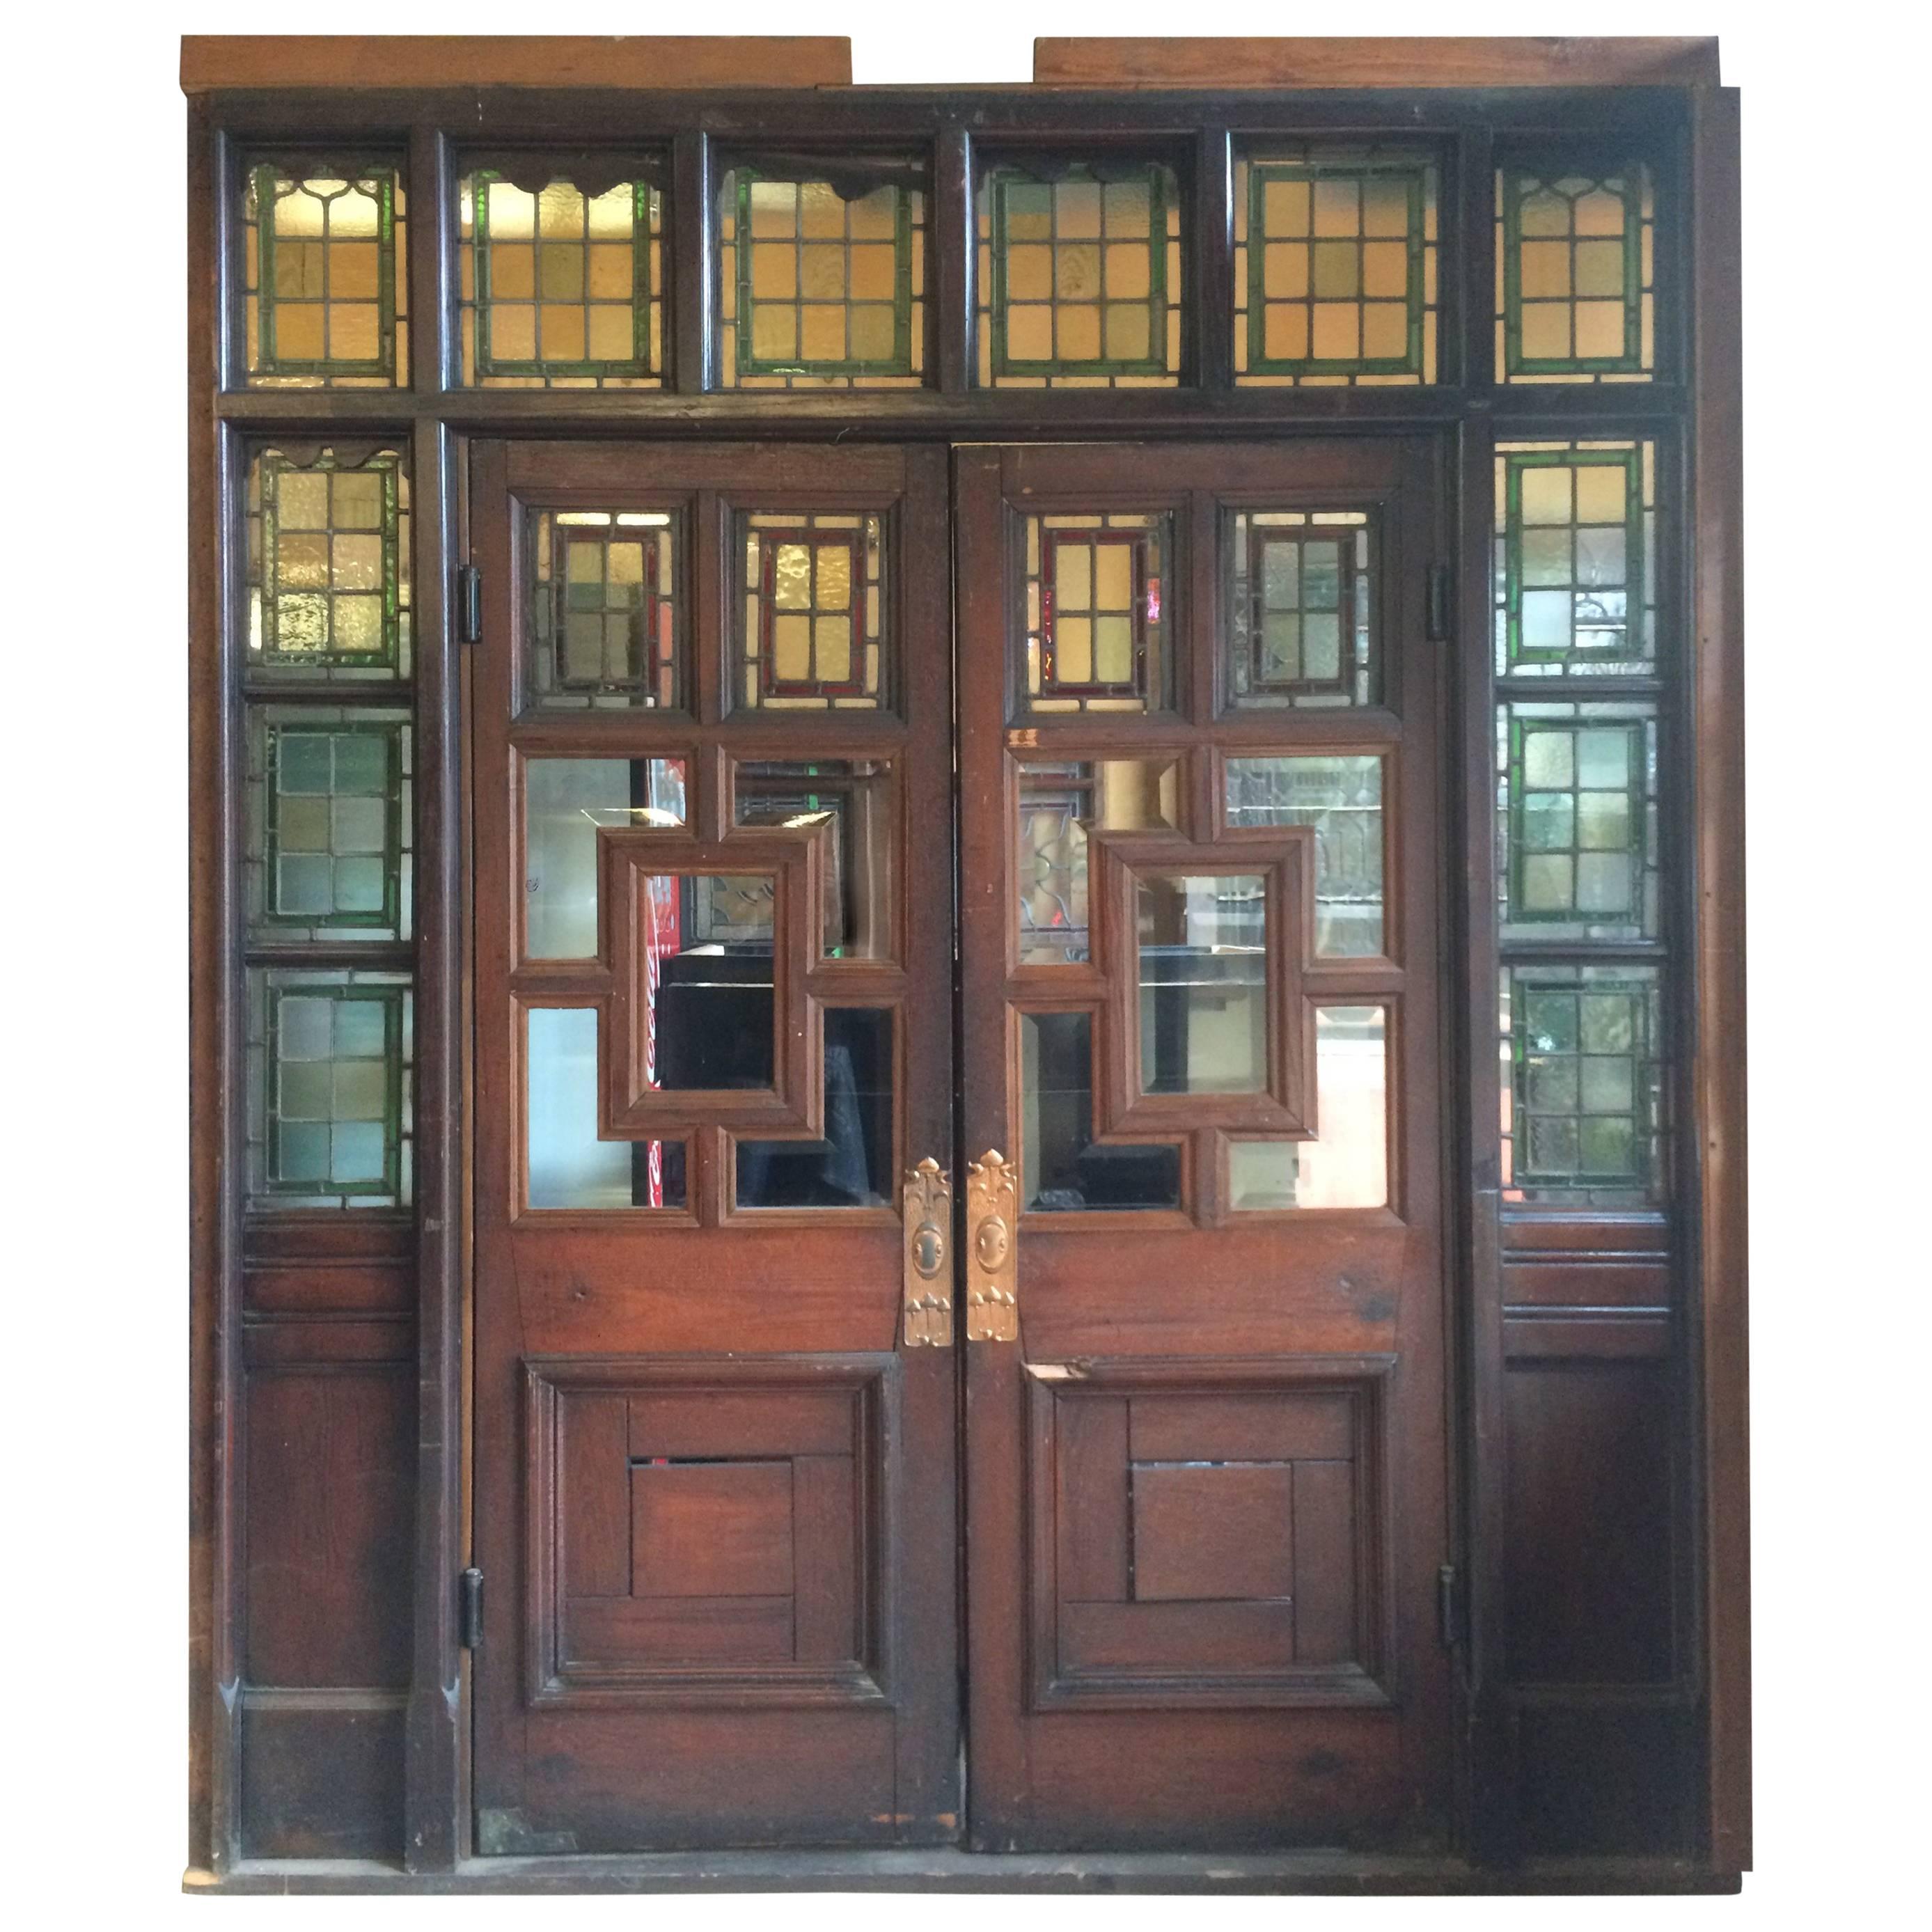 English Pub Bar, Panelling and Stained Glass Ceiling, with Fox and Hounds For Sale